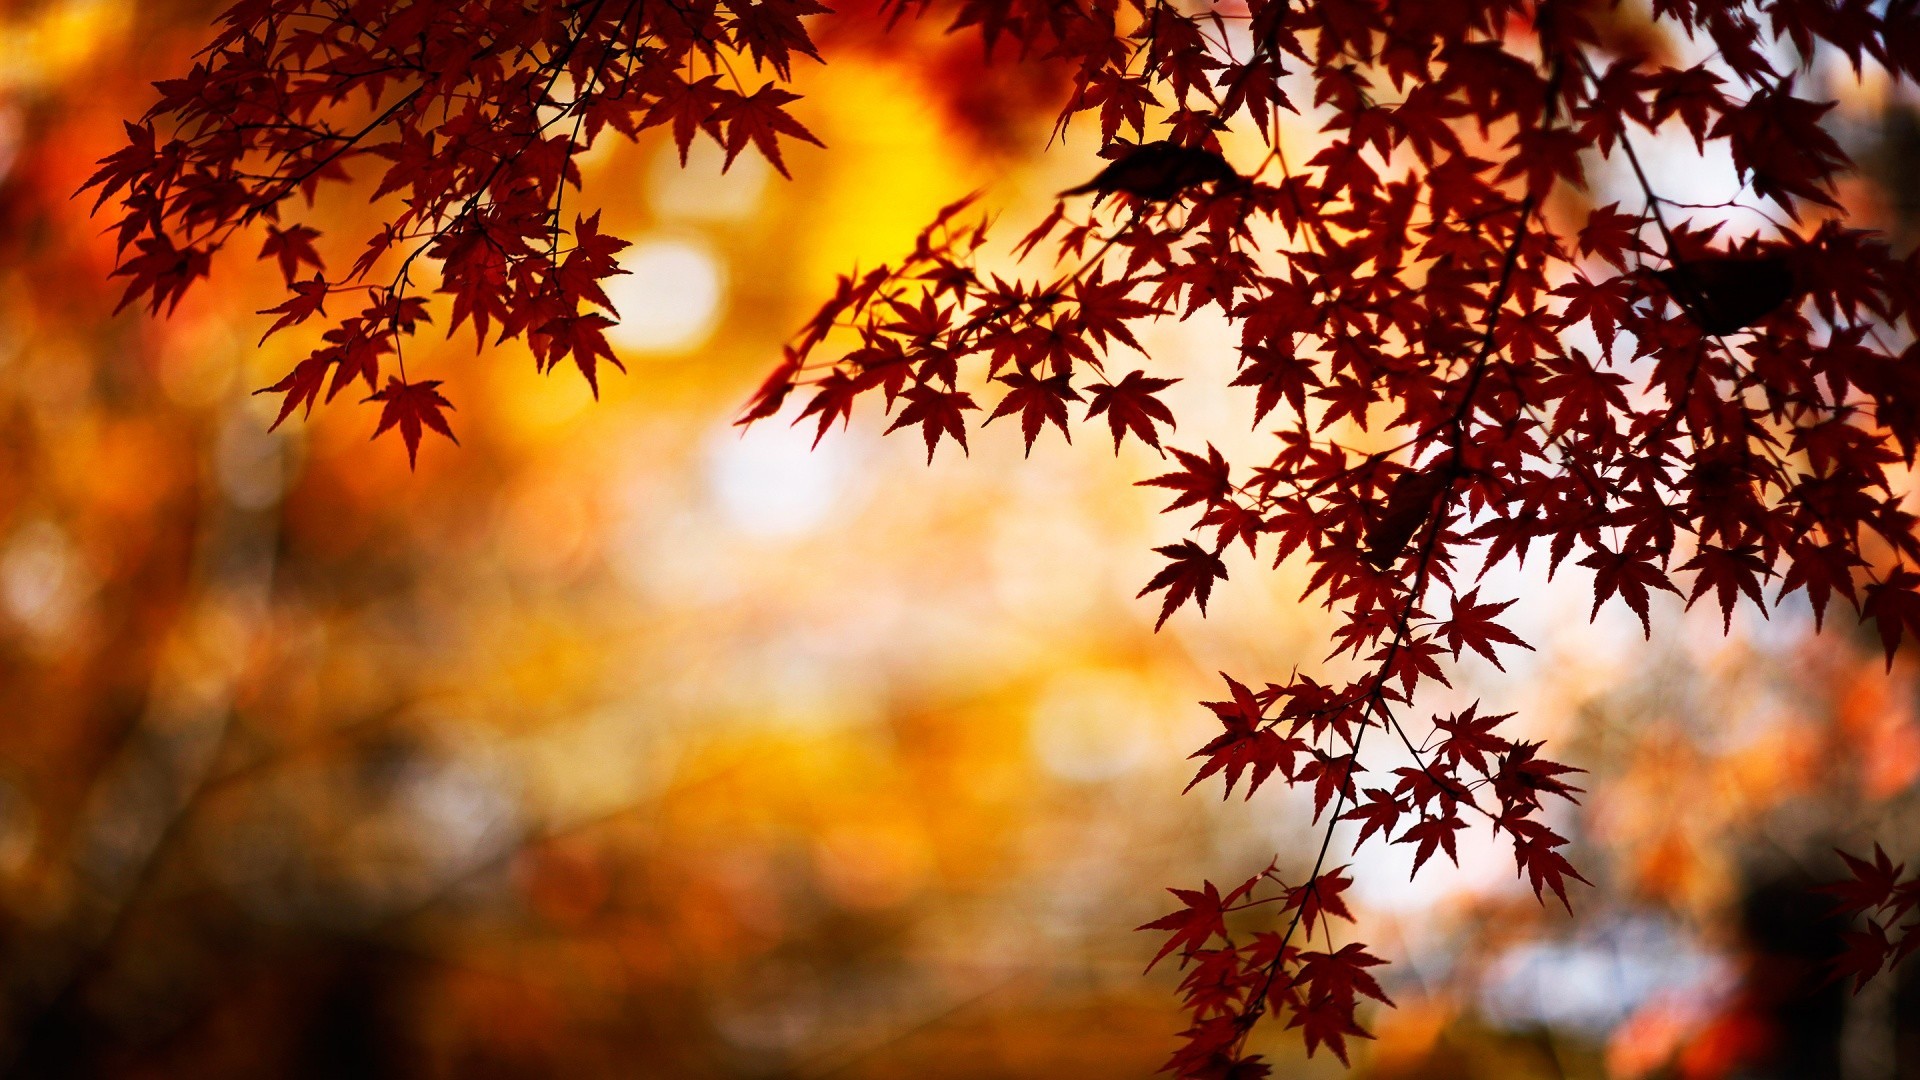 Autumn Leaves Background Wallpaper, Image, Background, Picture